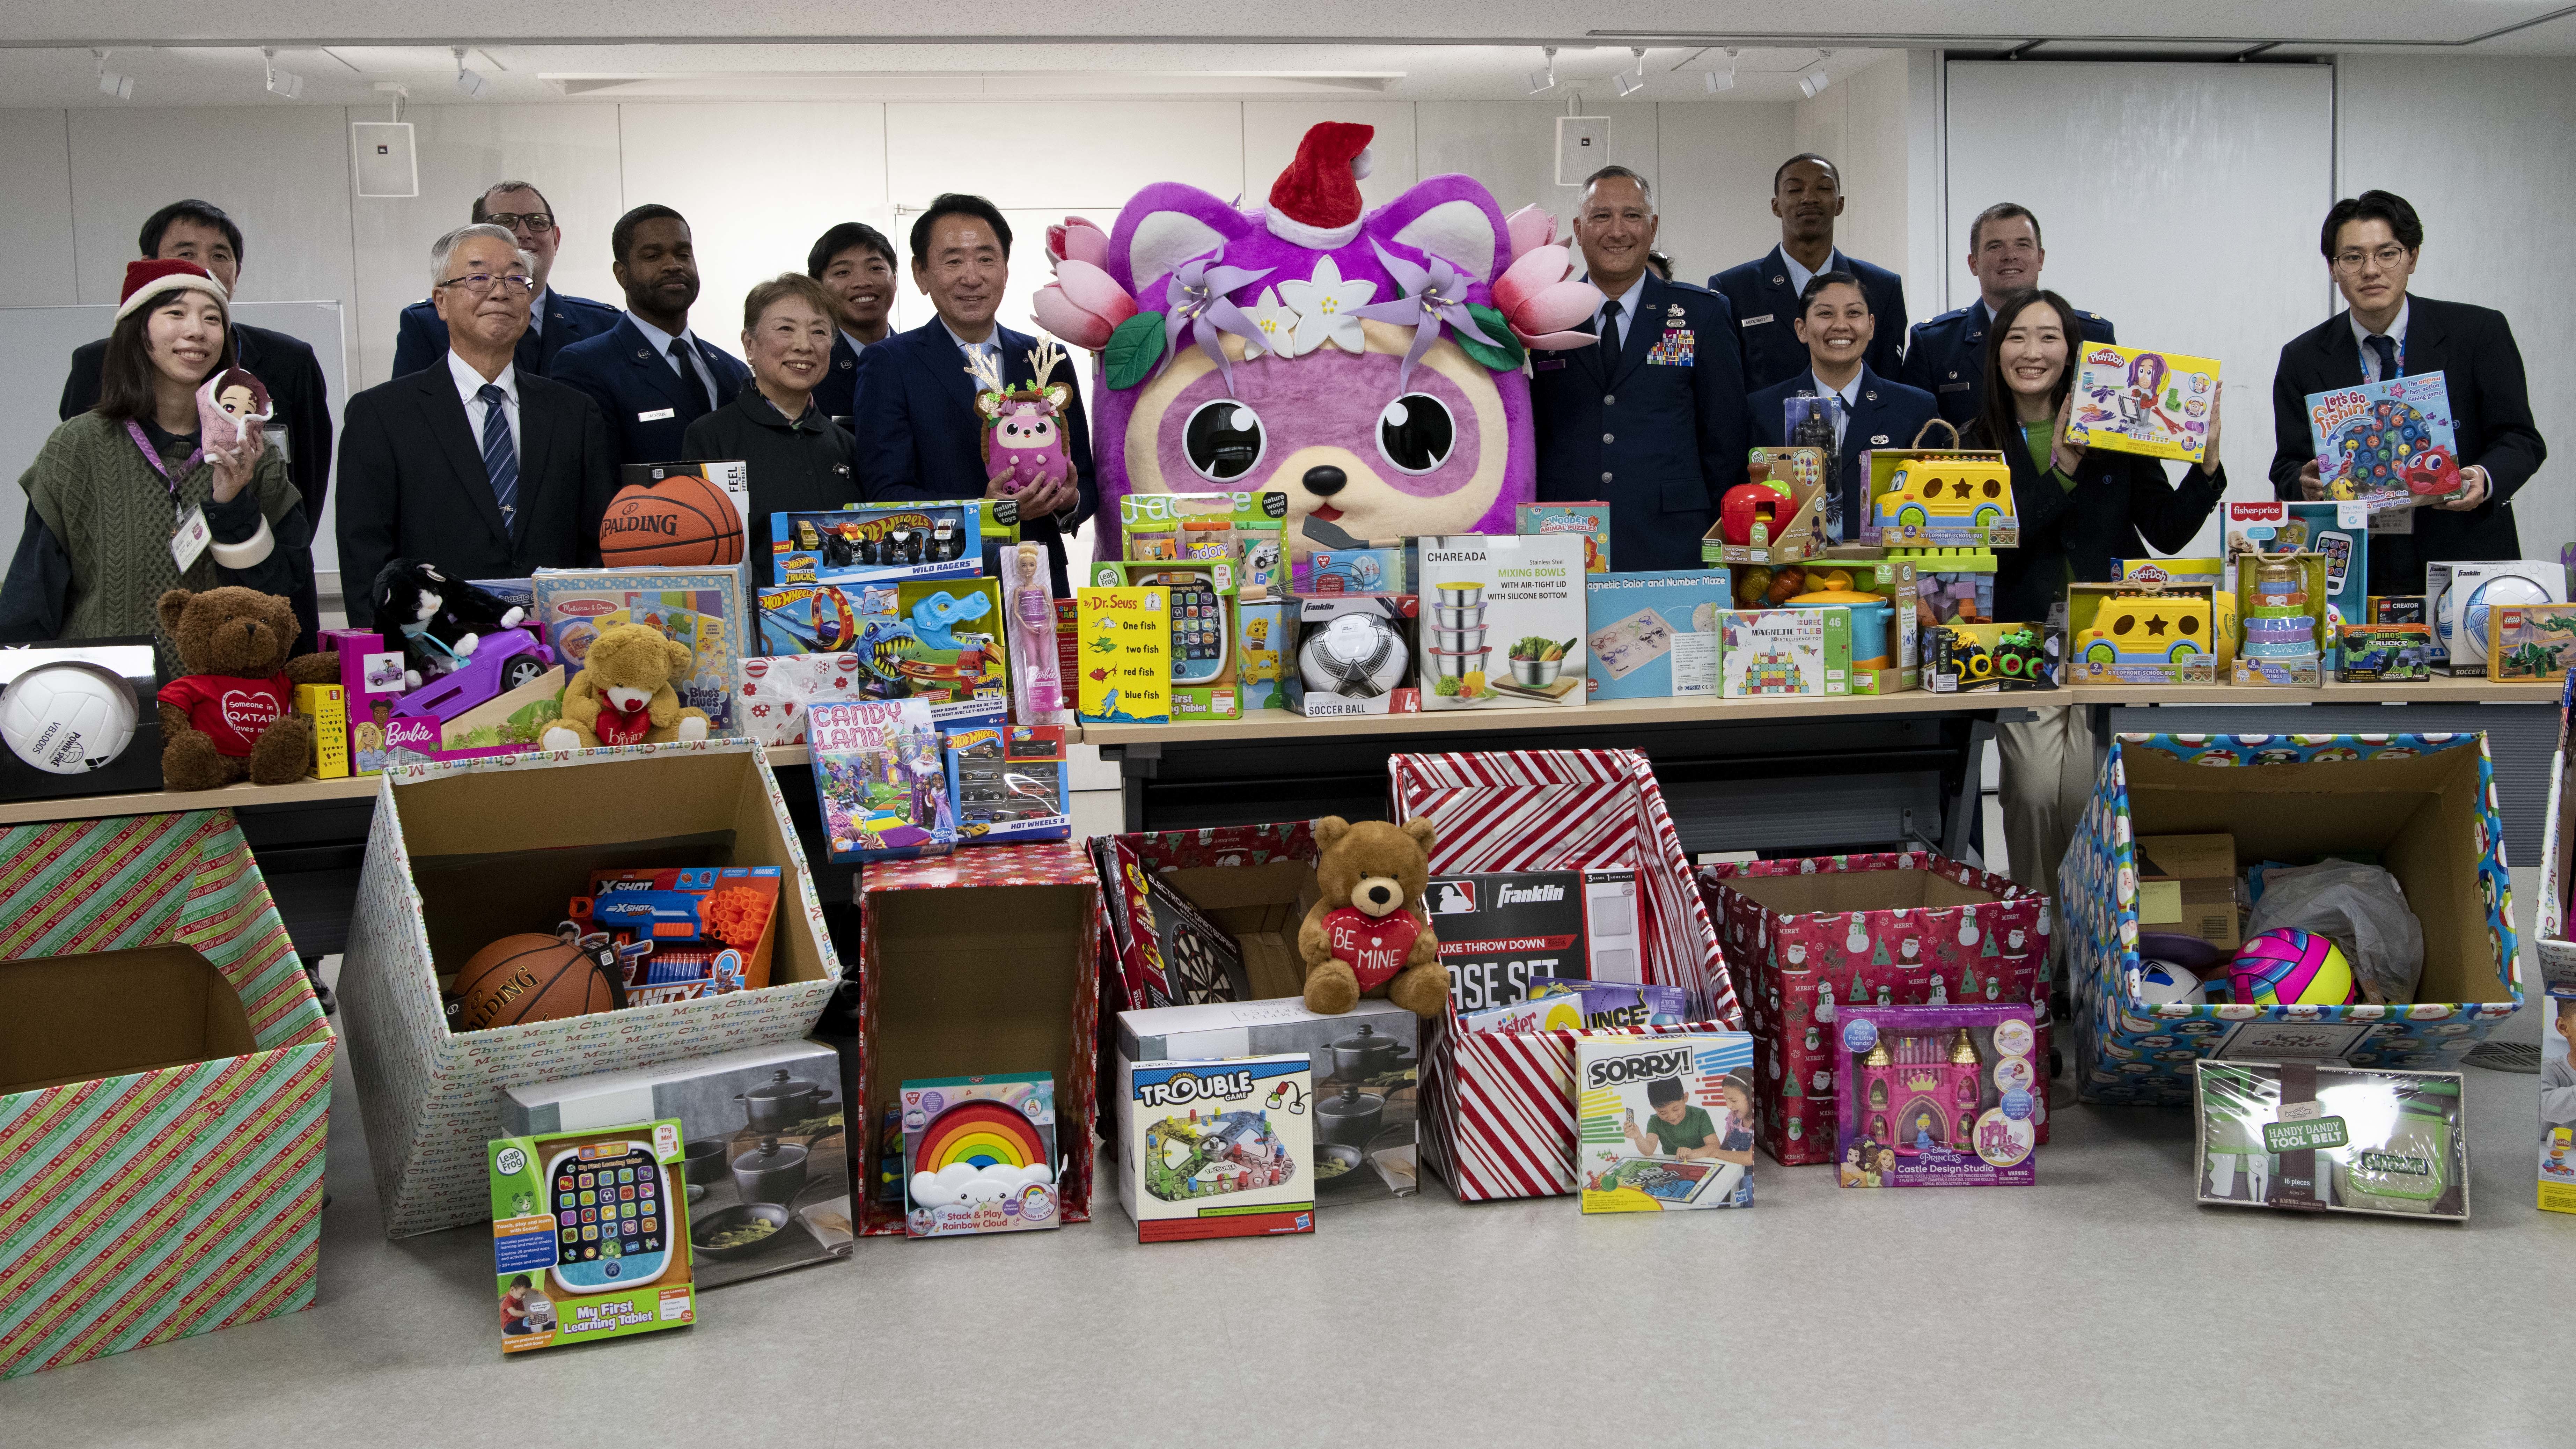 374th MXG celebrates the season of giving with annual toy drive